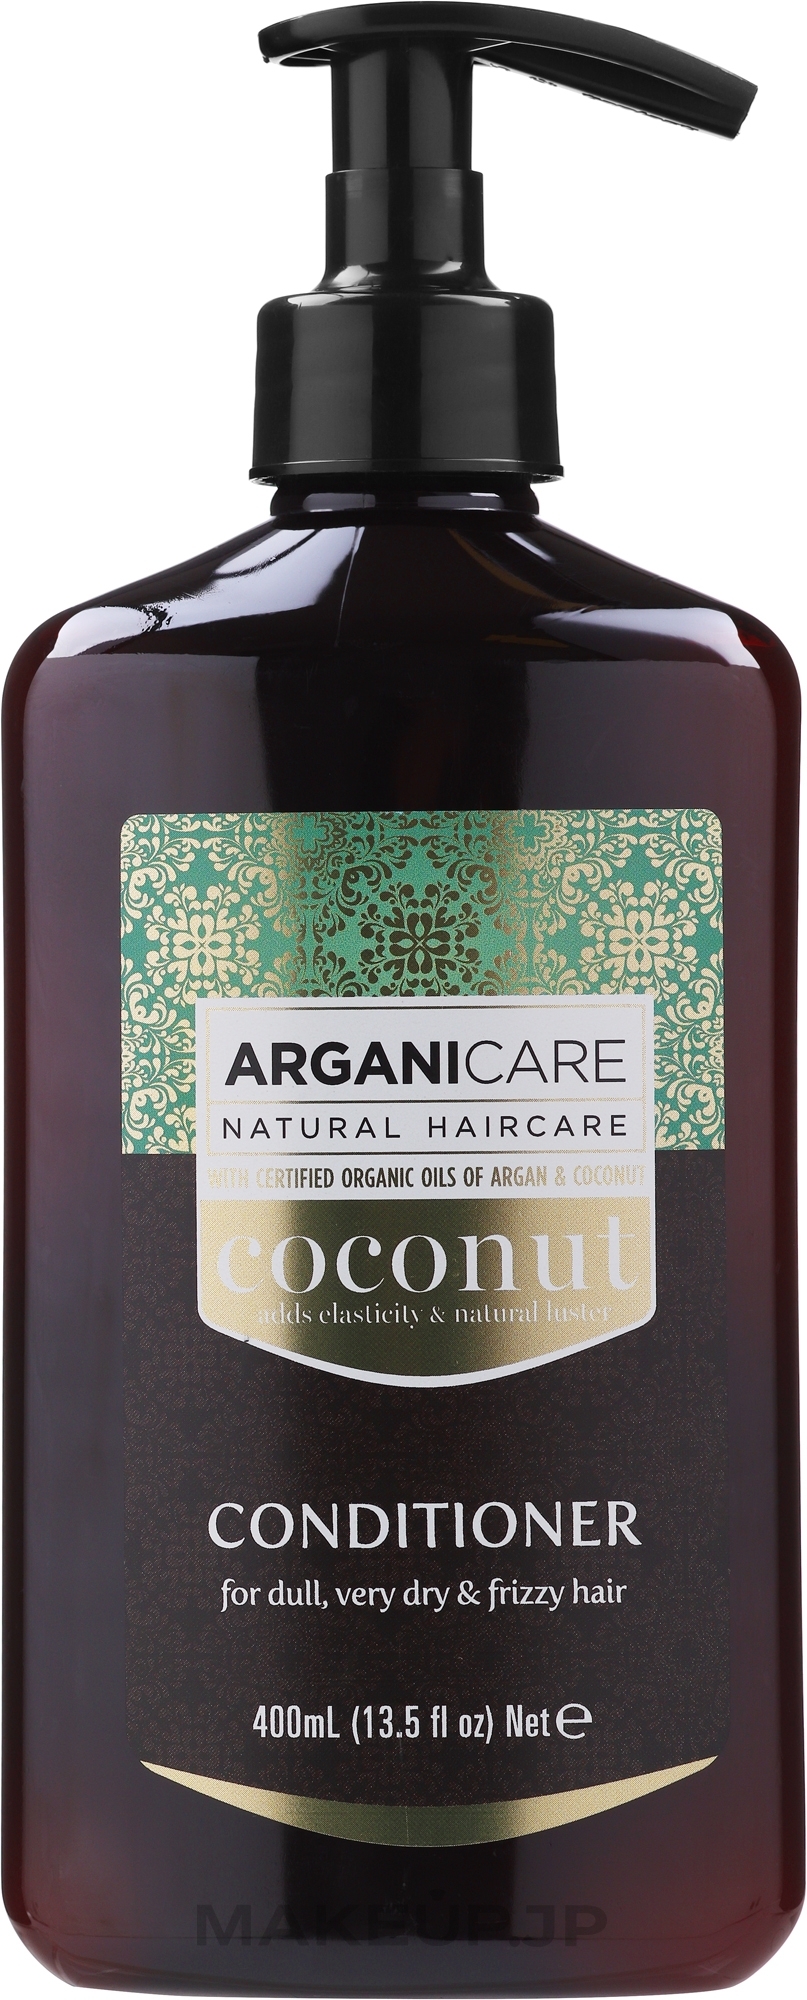 Coconut Hair Conditioner - Arganicare Coconut Conditioner For Dull, Very Dry & Frizzy Hair — photo 400 ml